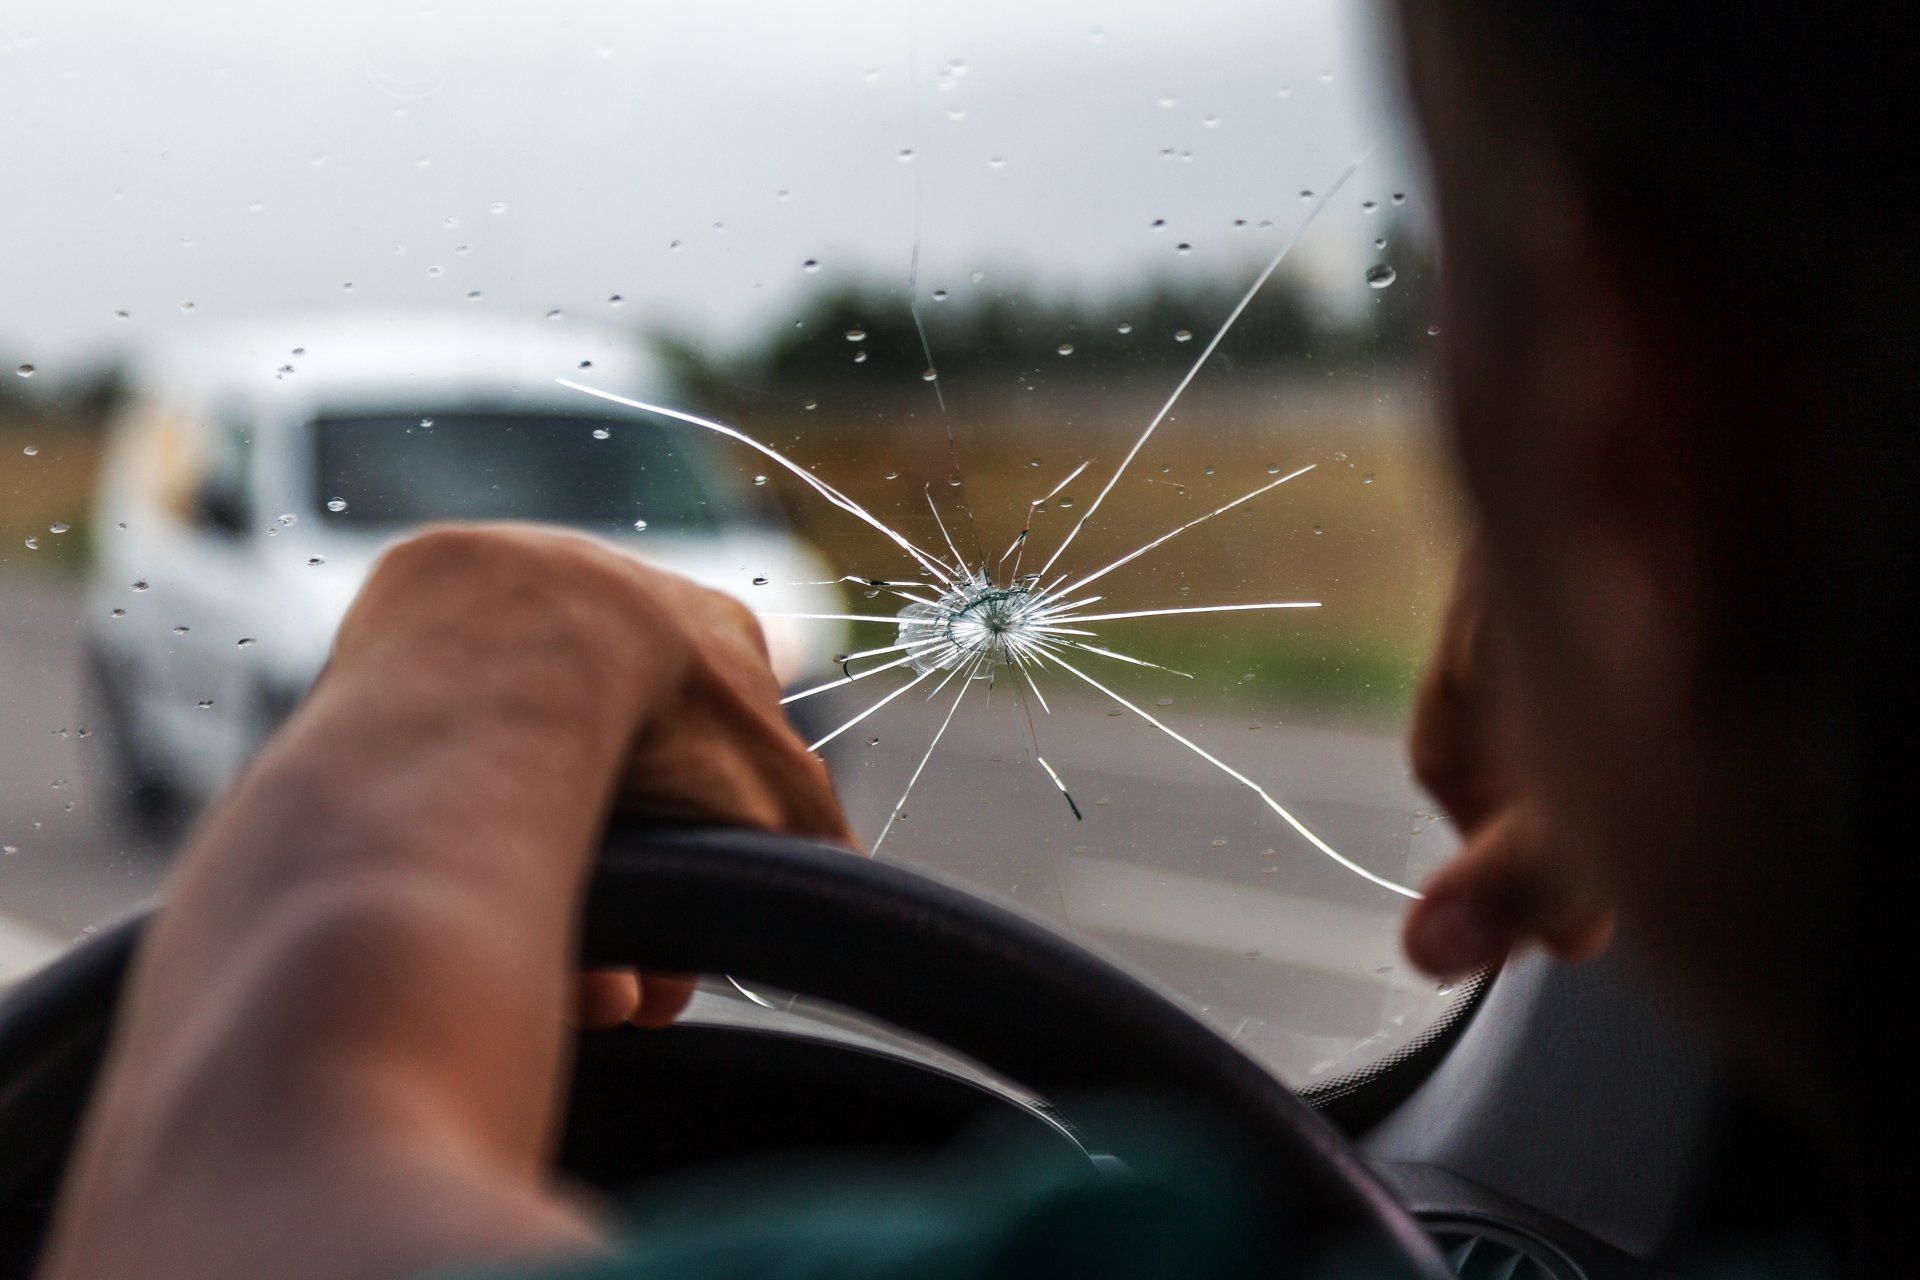 Broken car windshield, damaged glass with traces of oncoming stone on road